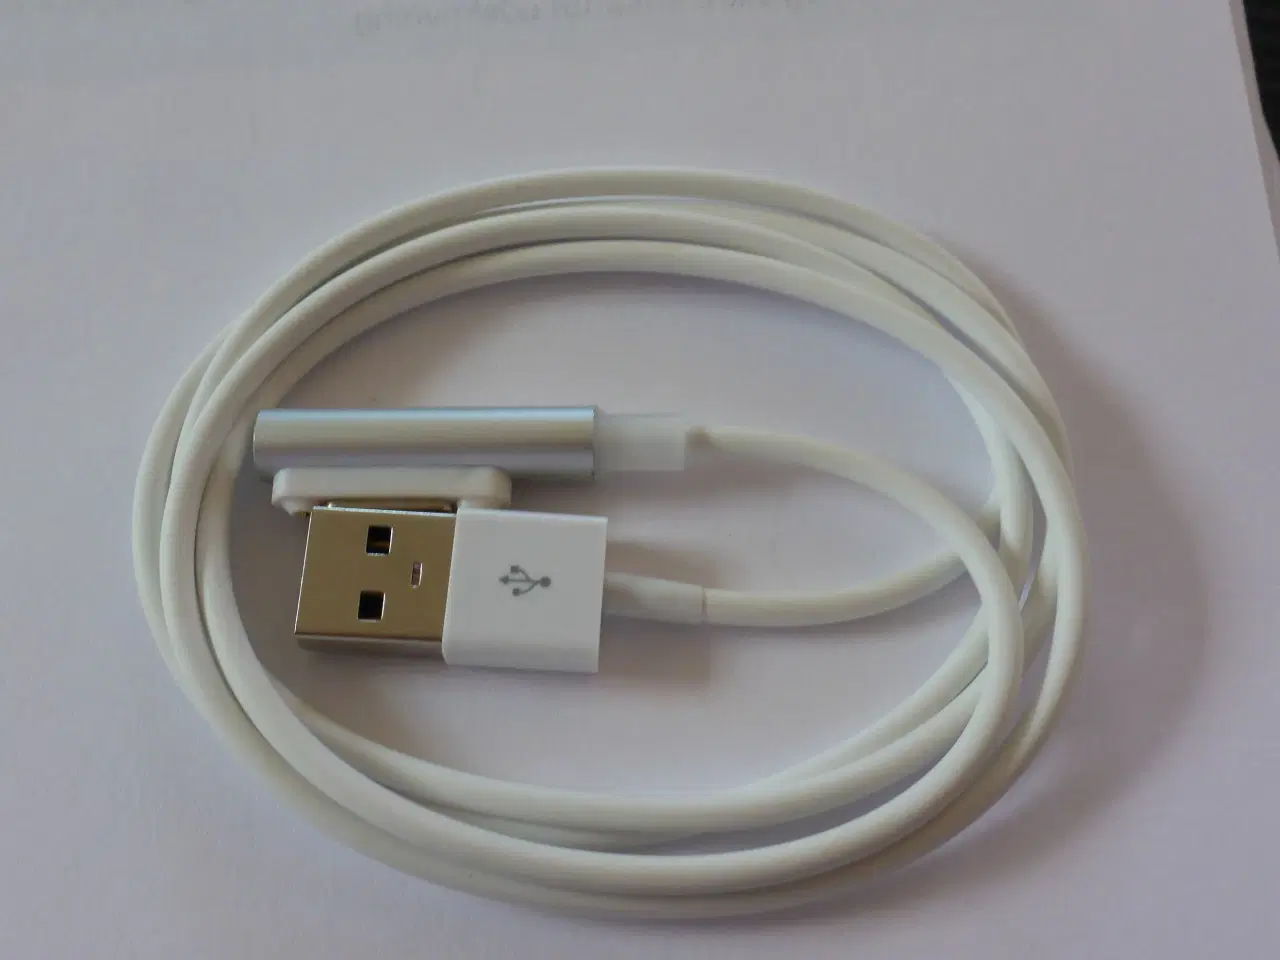 Billede 5 - Kabel, t. Sony Ericsson, xperia z3 compact